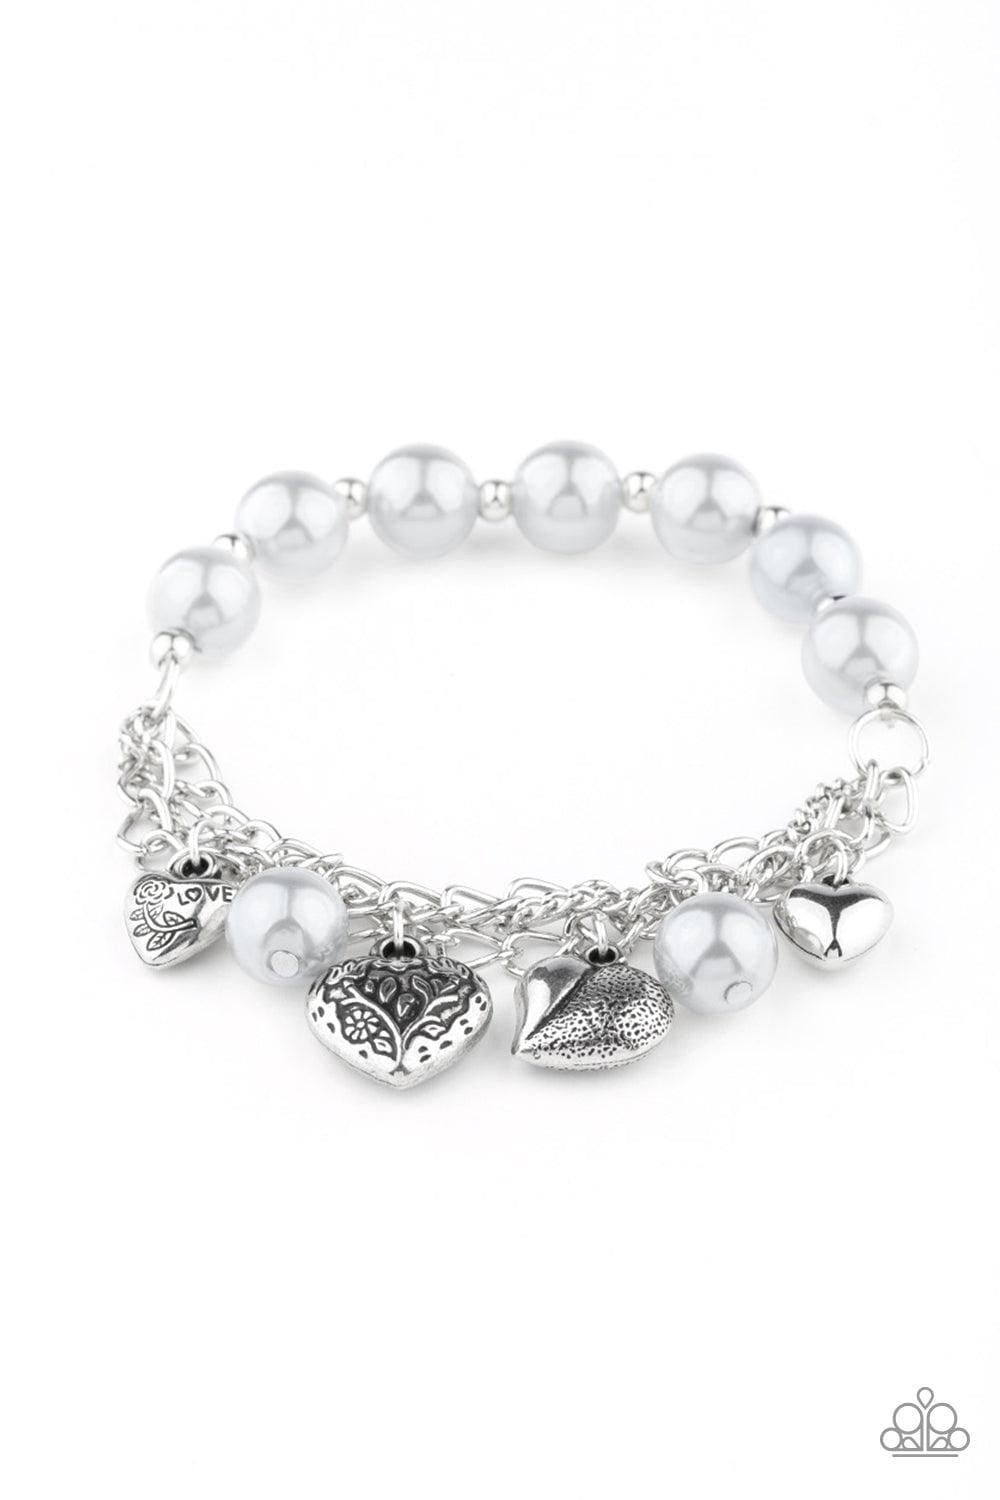 Paparazzi Accessories - More Amour - Silver Bracelet - Bling by JessieK